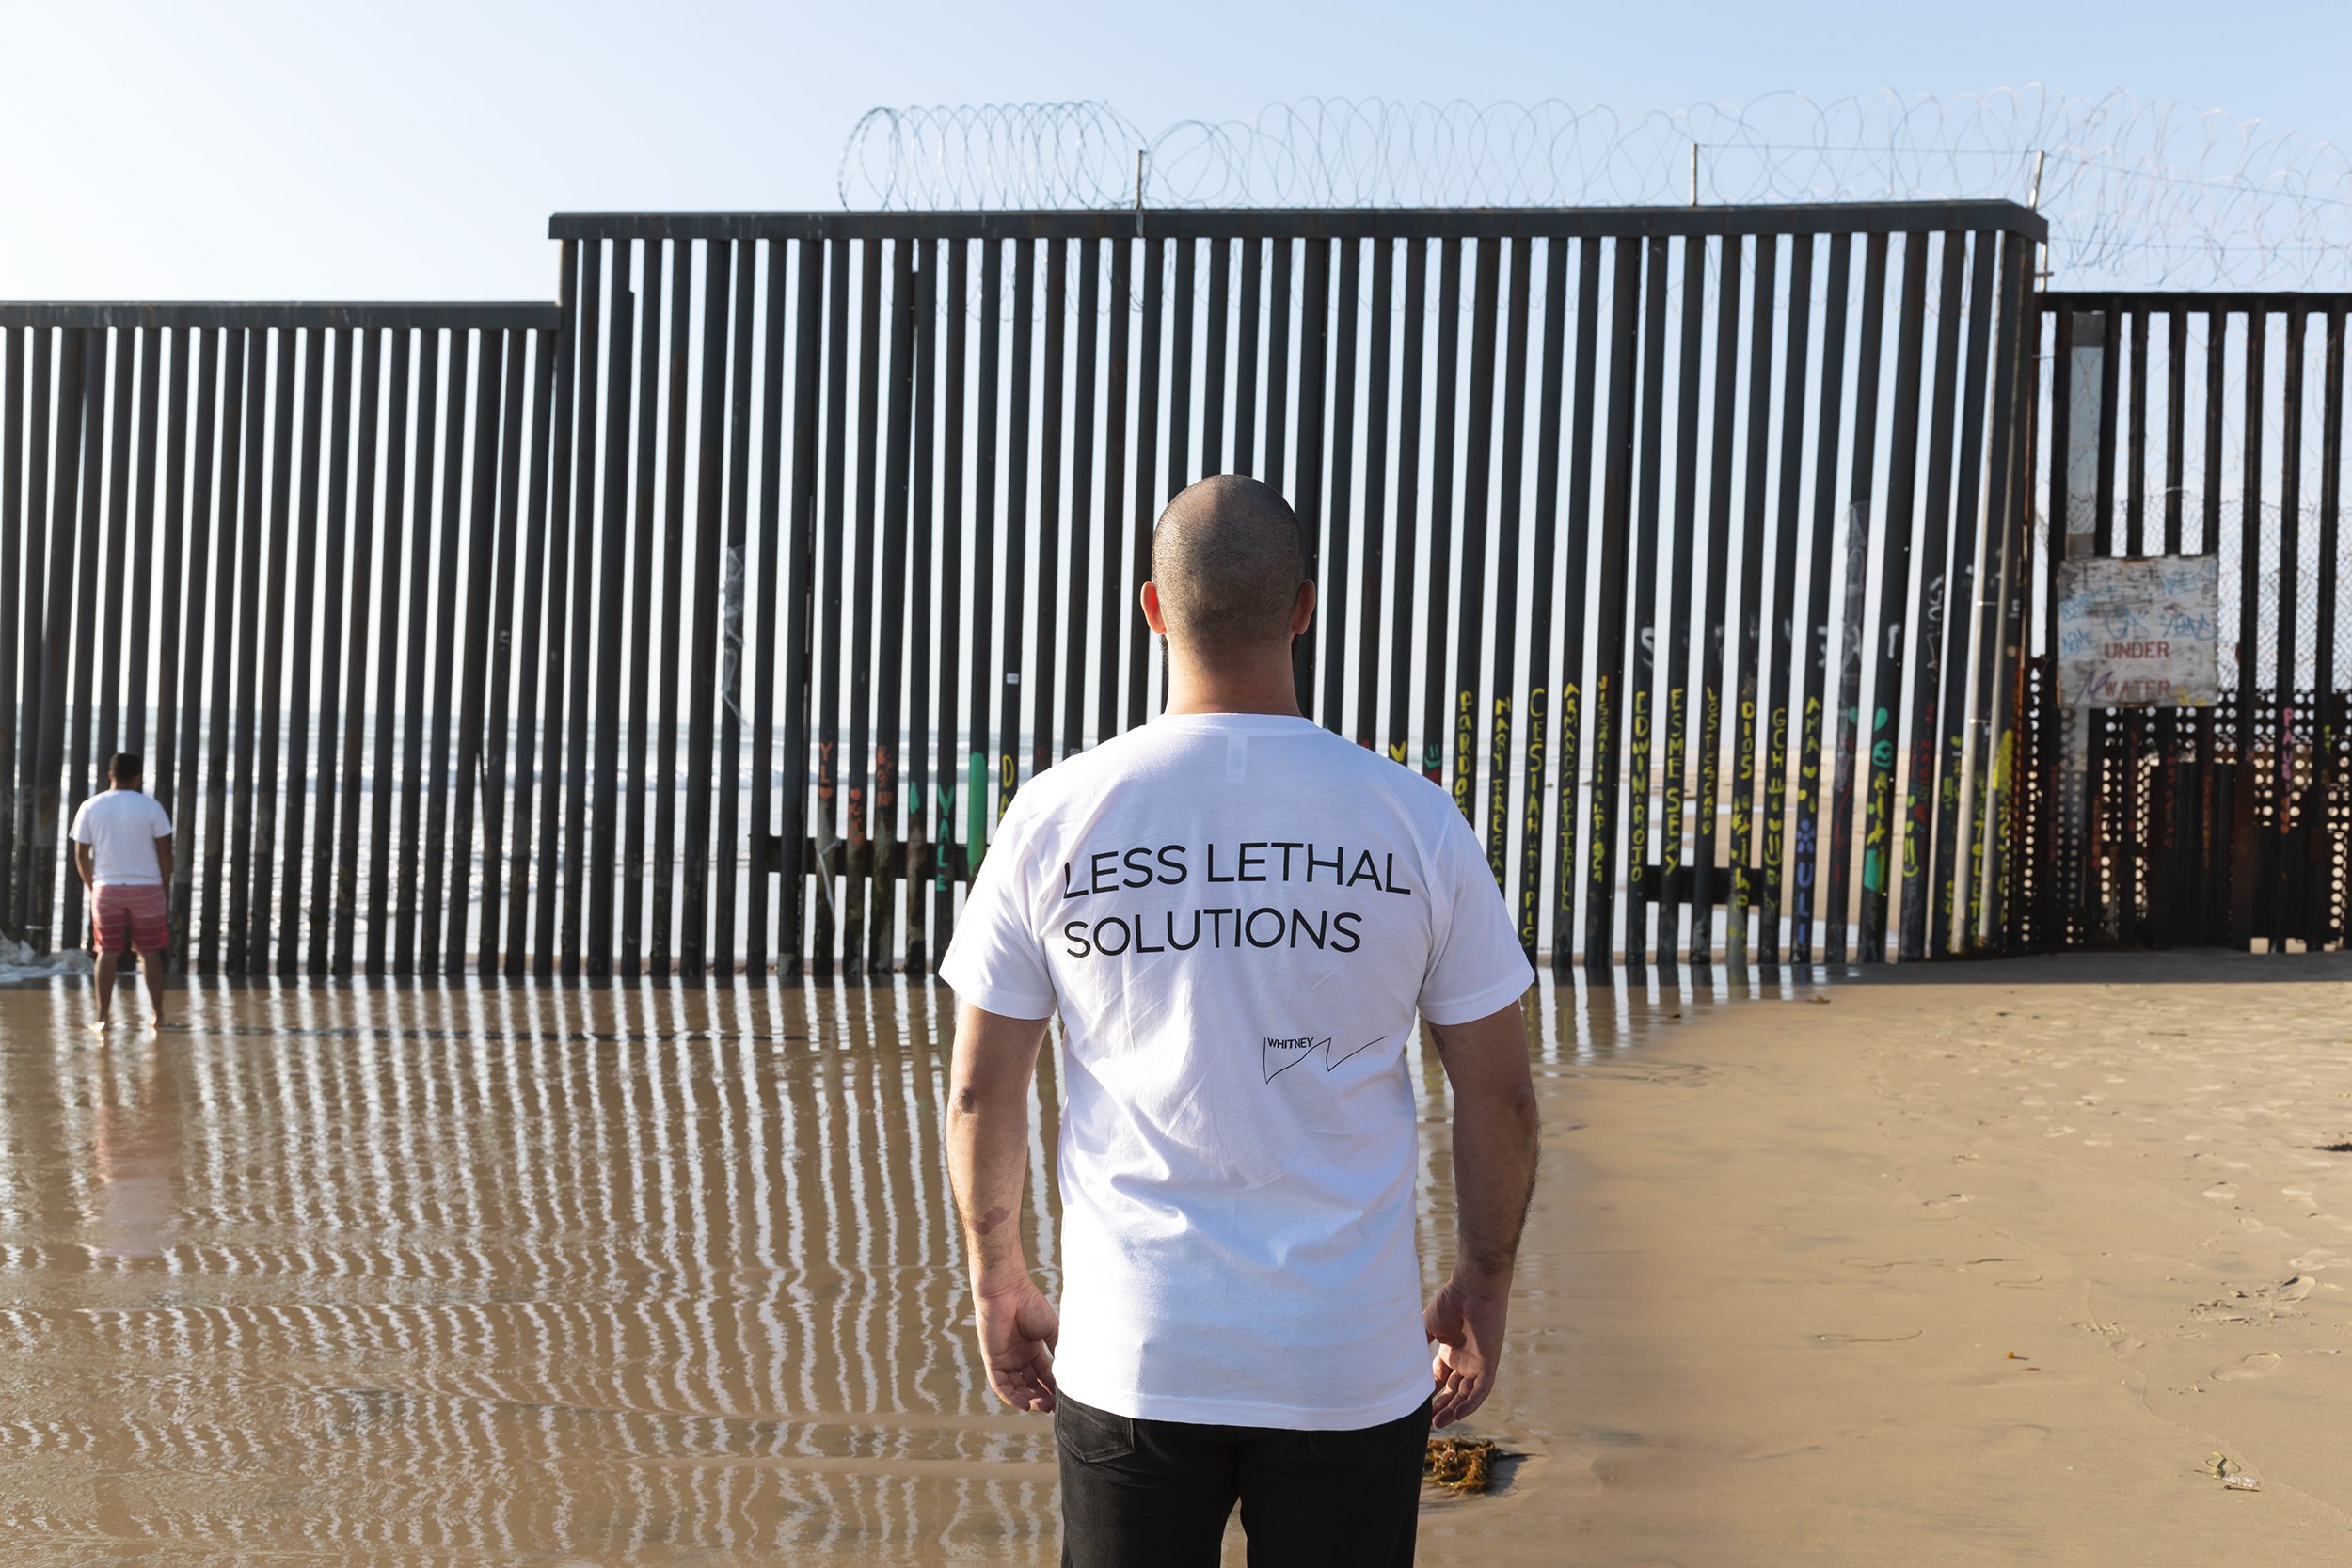   Less Lethal Solutions (US/Mexico Border, Tijuana, MX)  site-specific action, custom silkscreened t-shirt, photographic documentation 